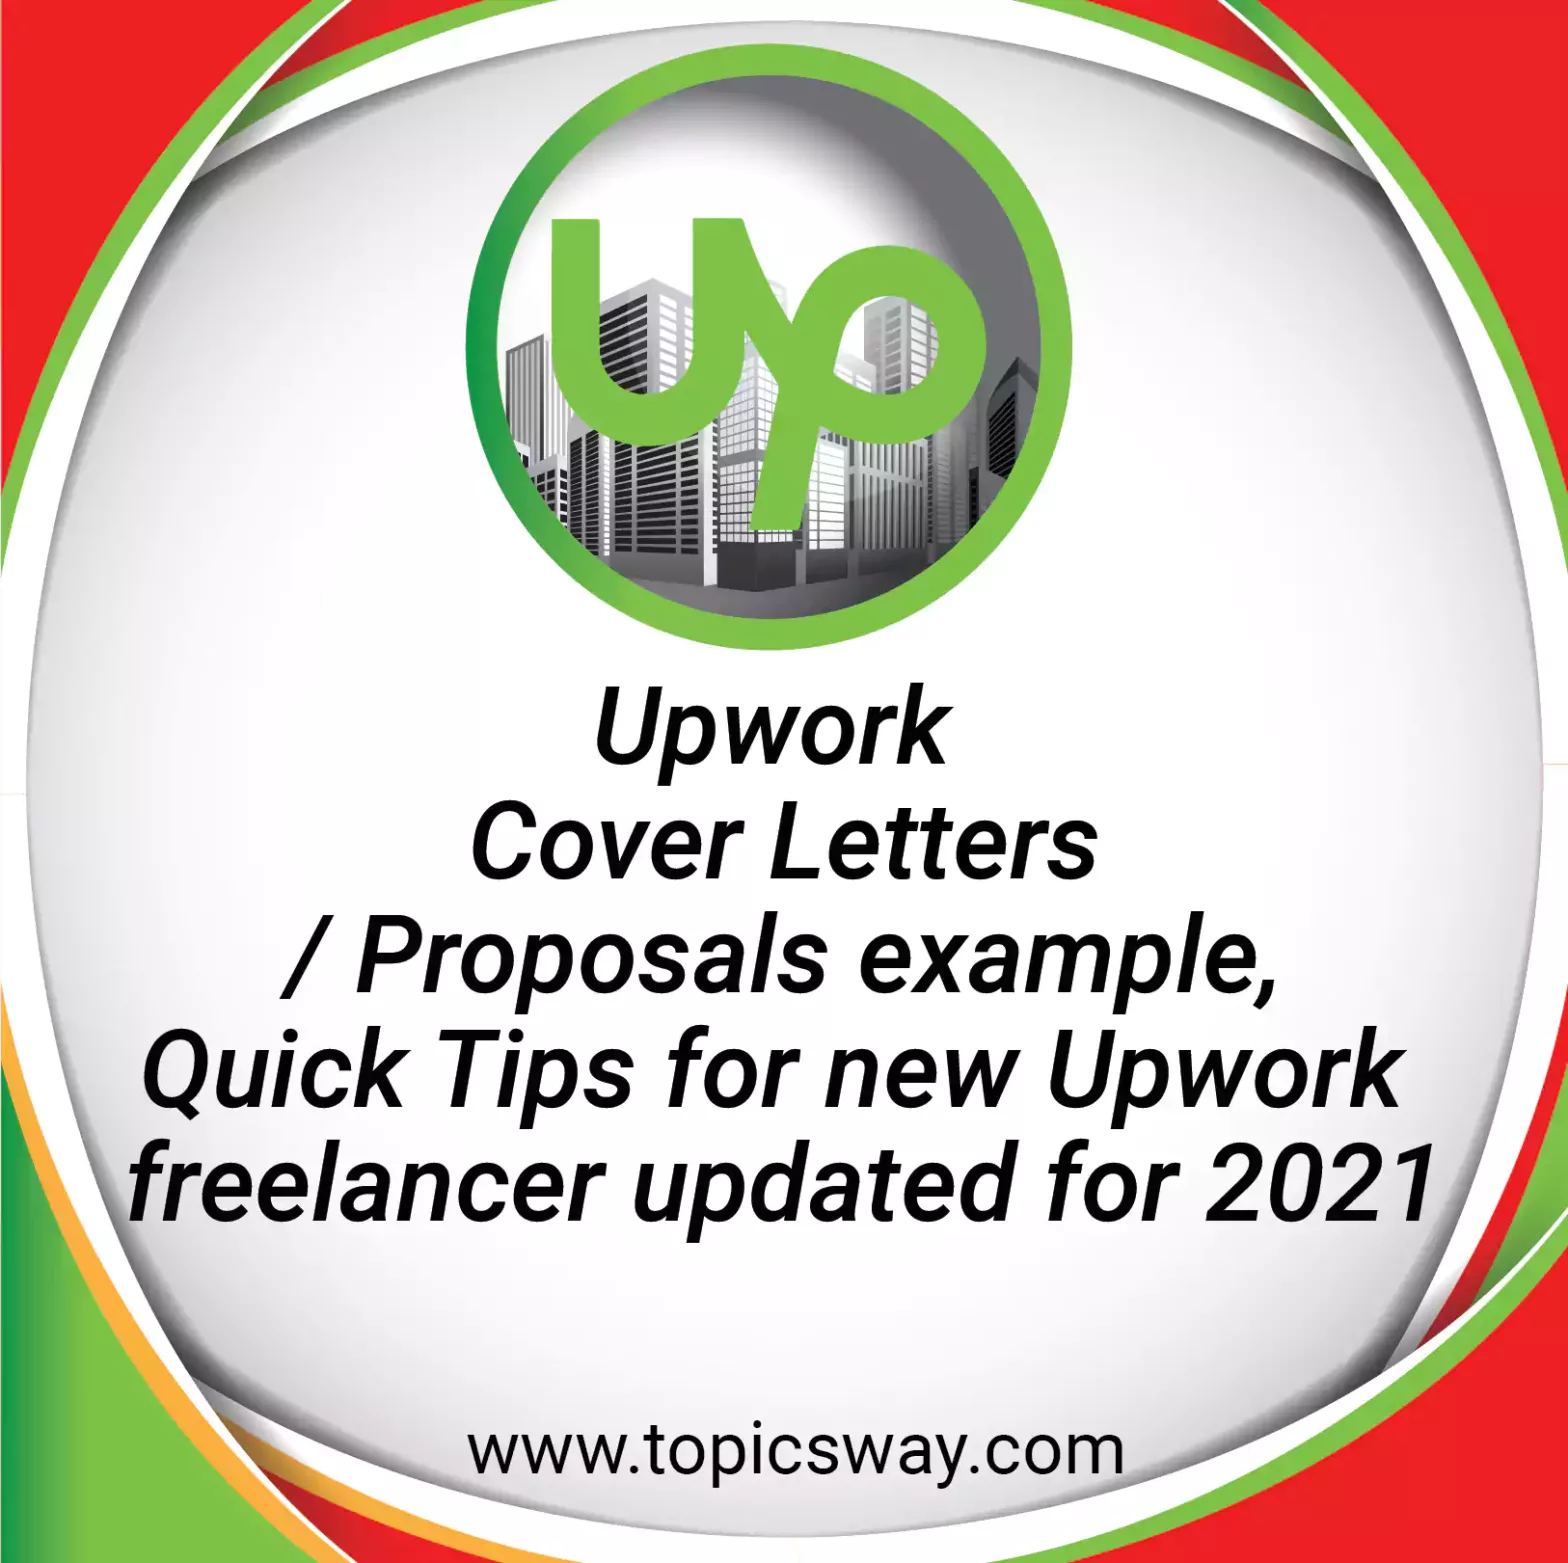 Upwork Cover Letters / Proposals example, Quick Tips for new Upwork freelancer updated for 2021